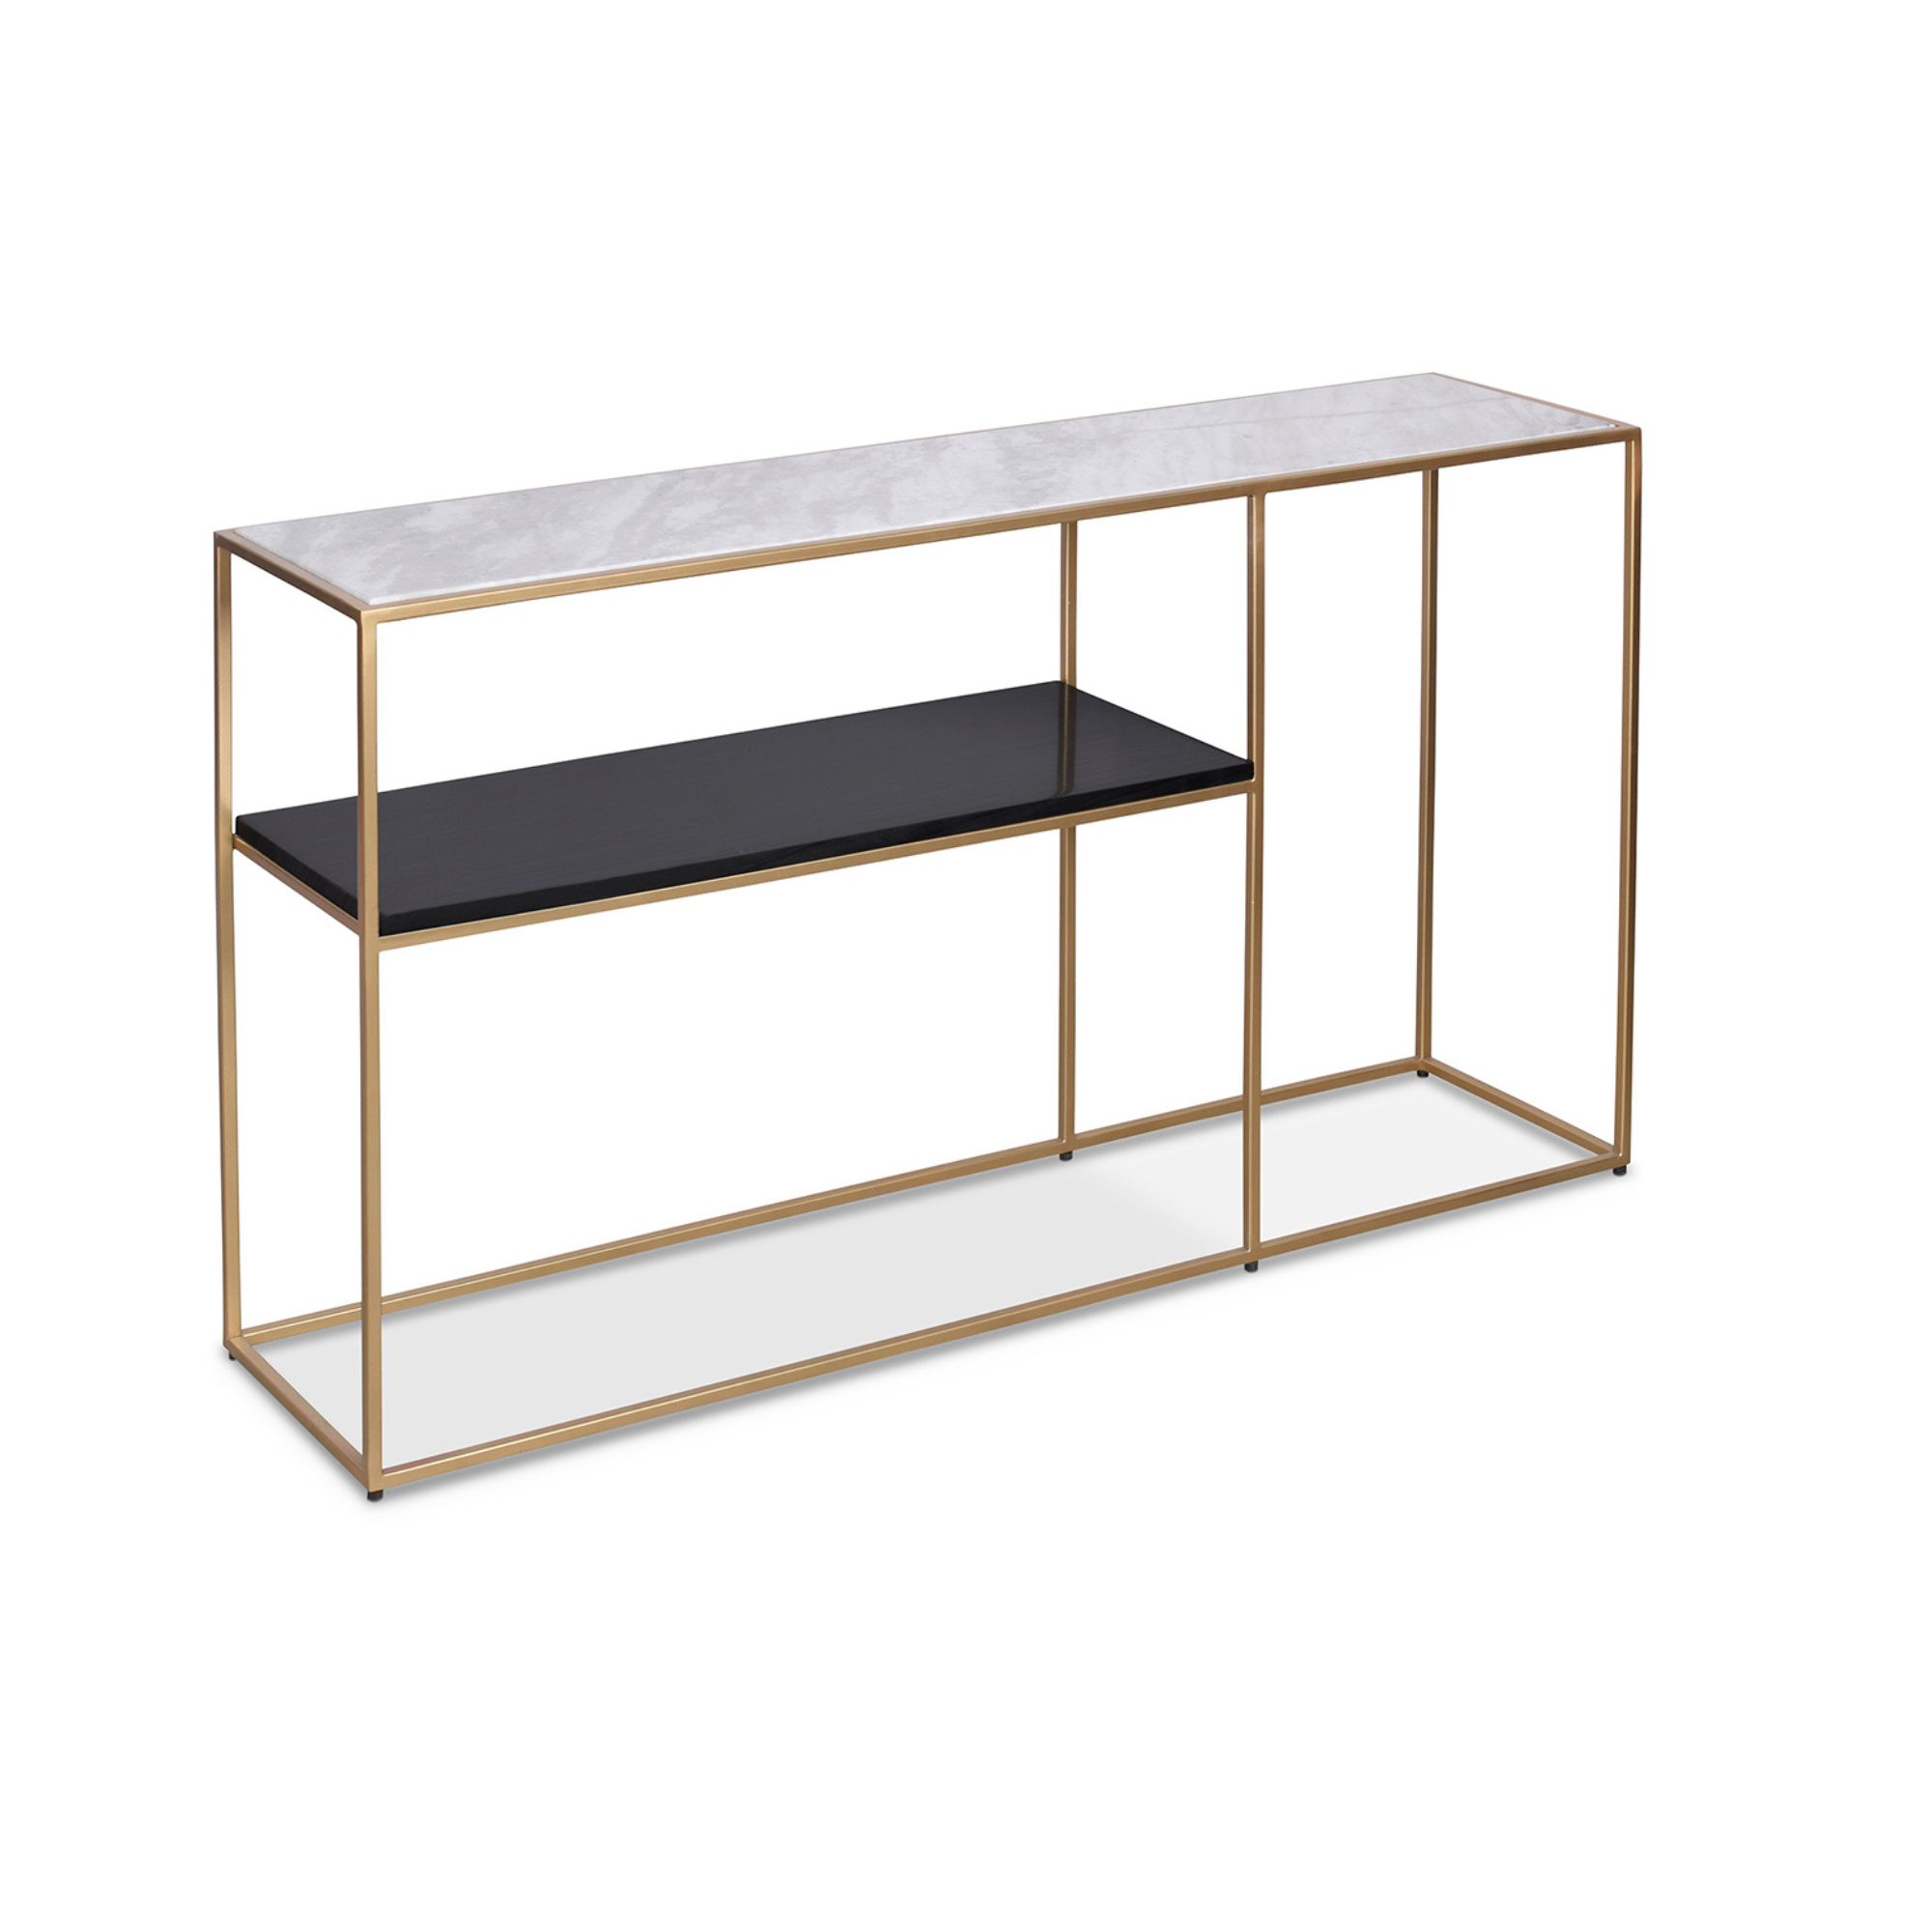 Maddox Console Table